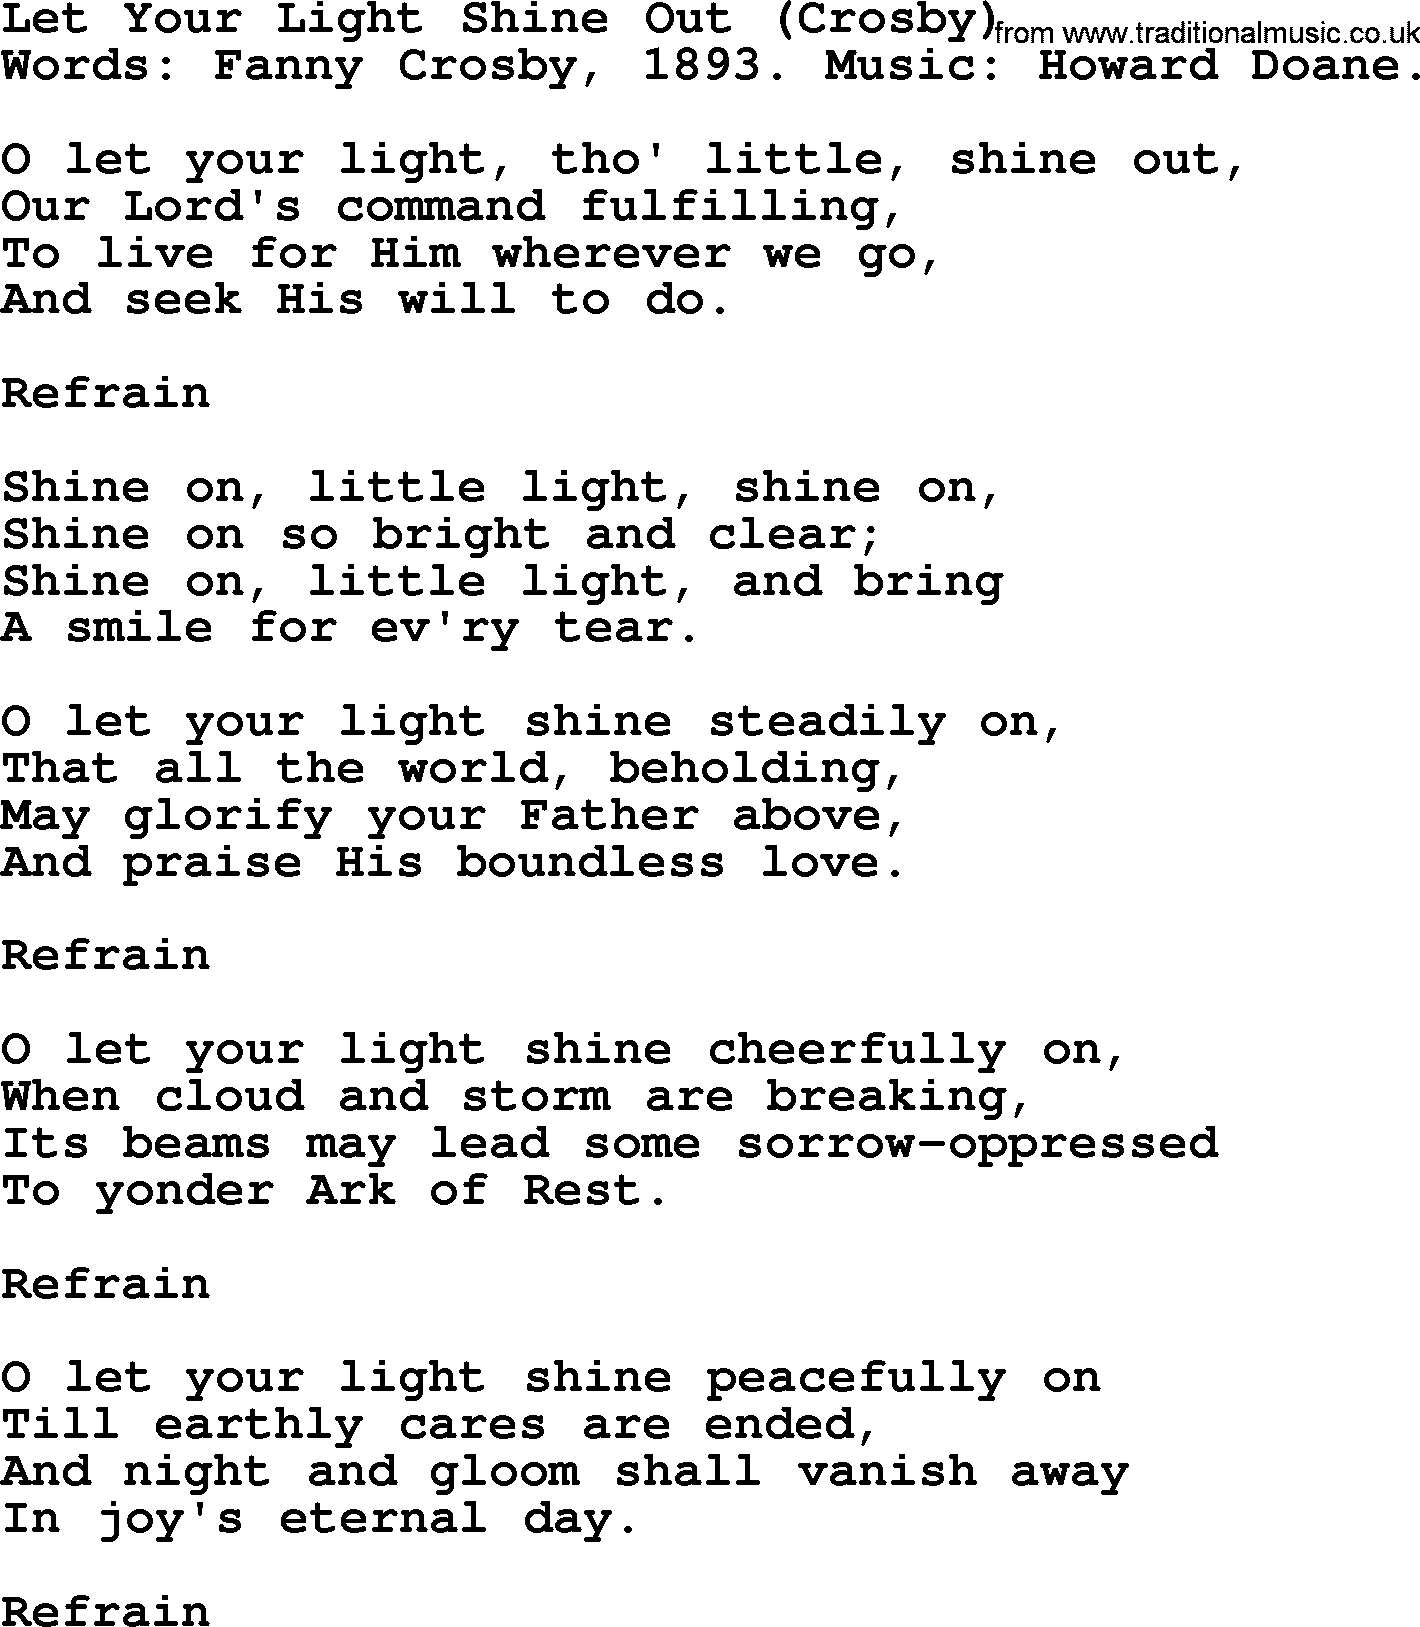 Fanny Crosby song: Let Your Light Shine Out, lyrics